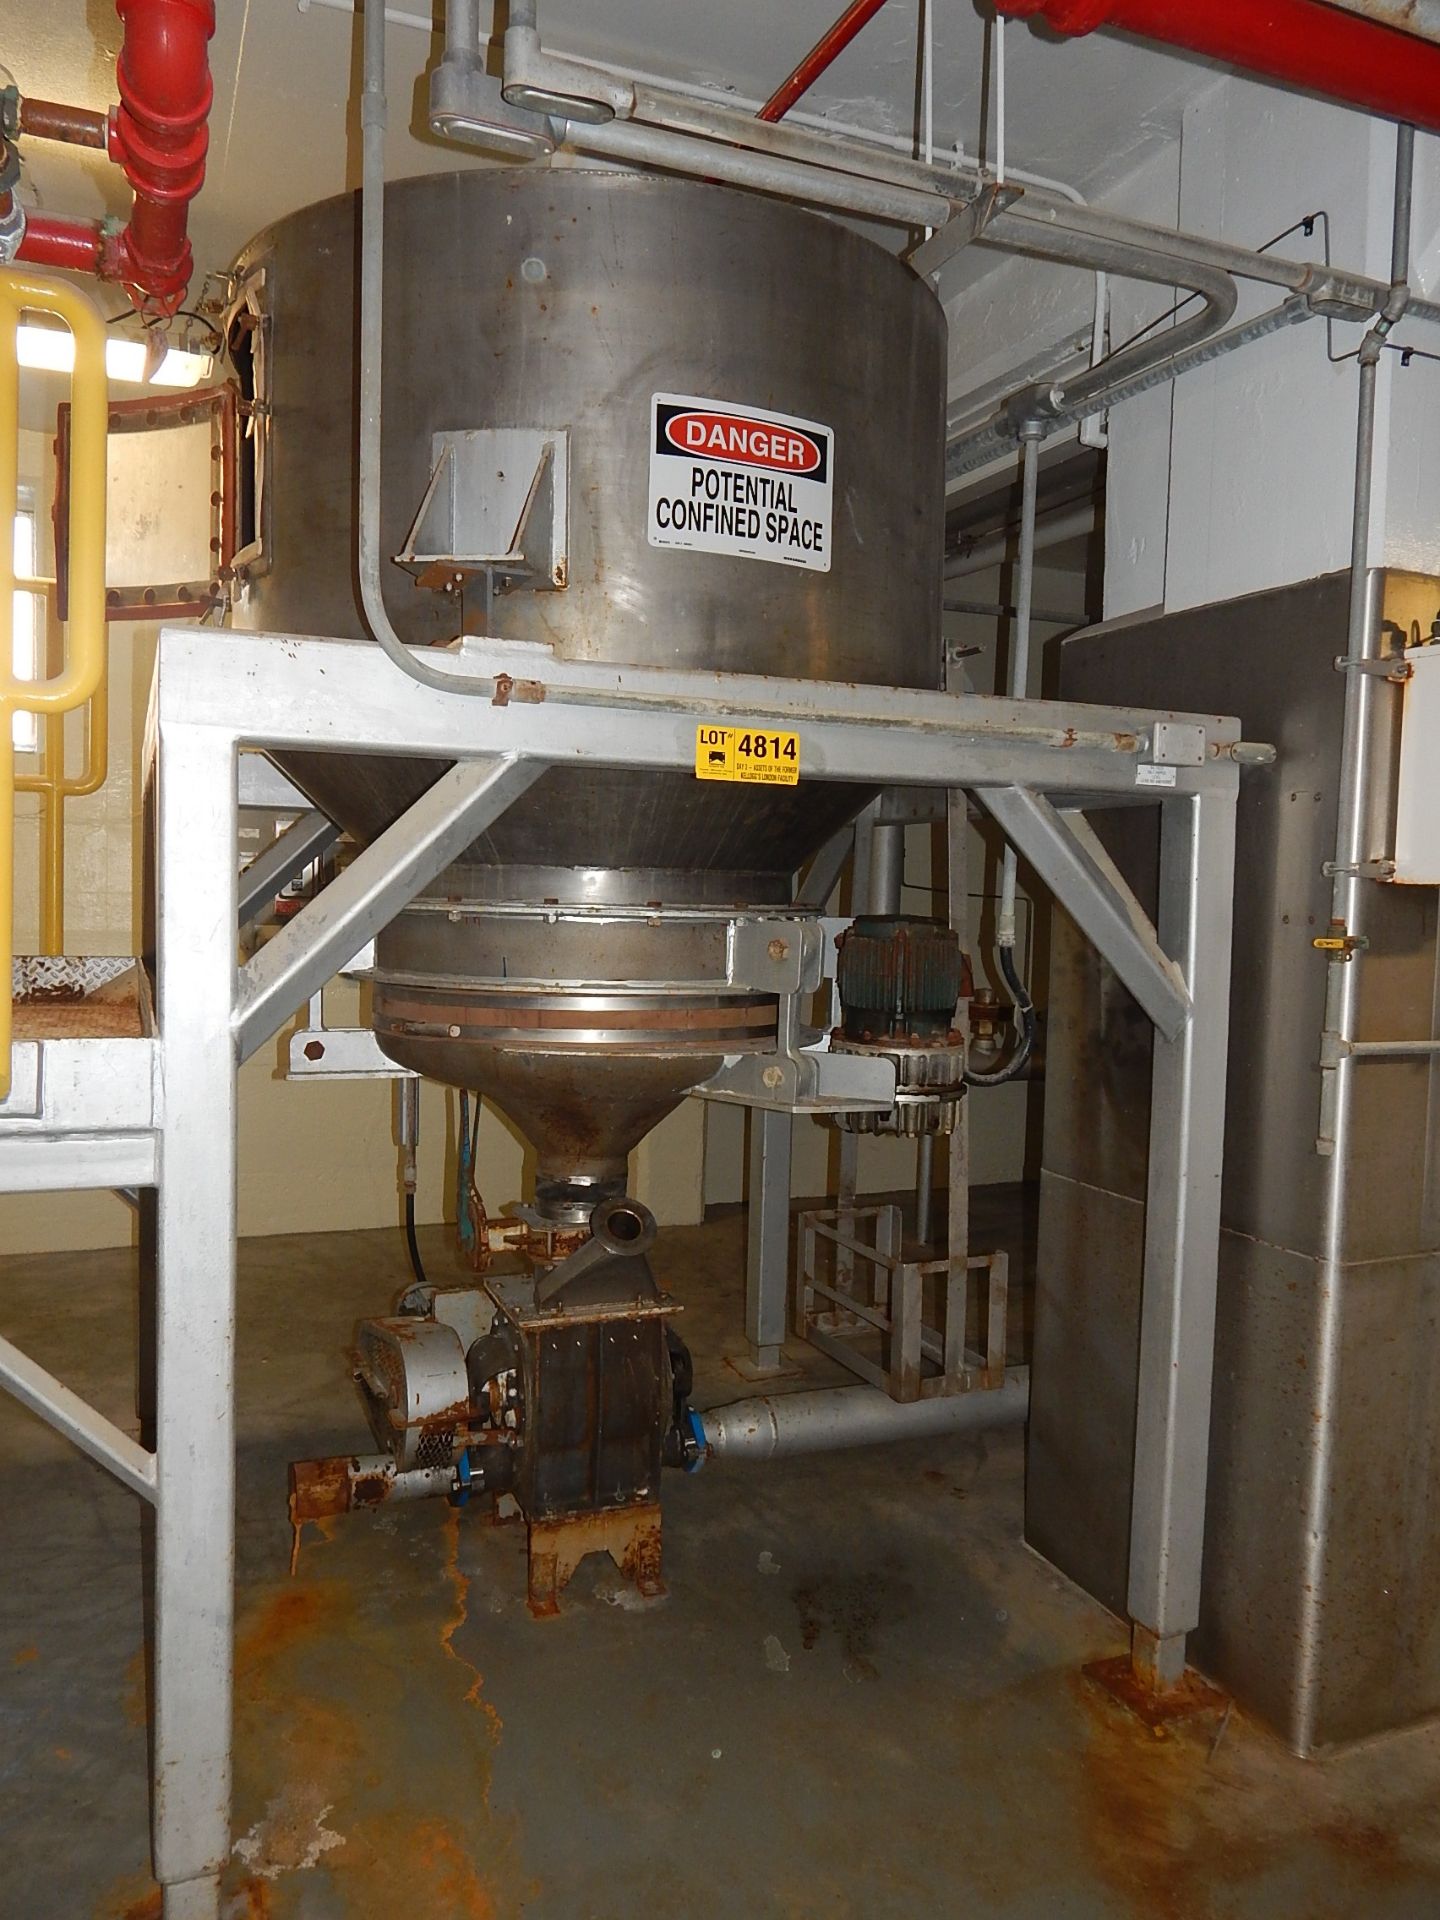 LOT/ RECEIVER BIN WITH VIBRATORY DISCHARGE AND AIRLOCK (CI) (BUILDING 1A, GROUND)